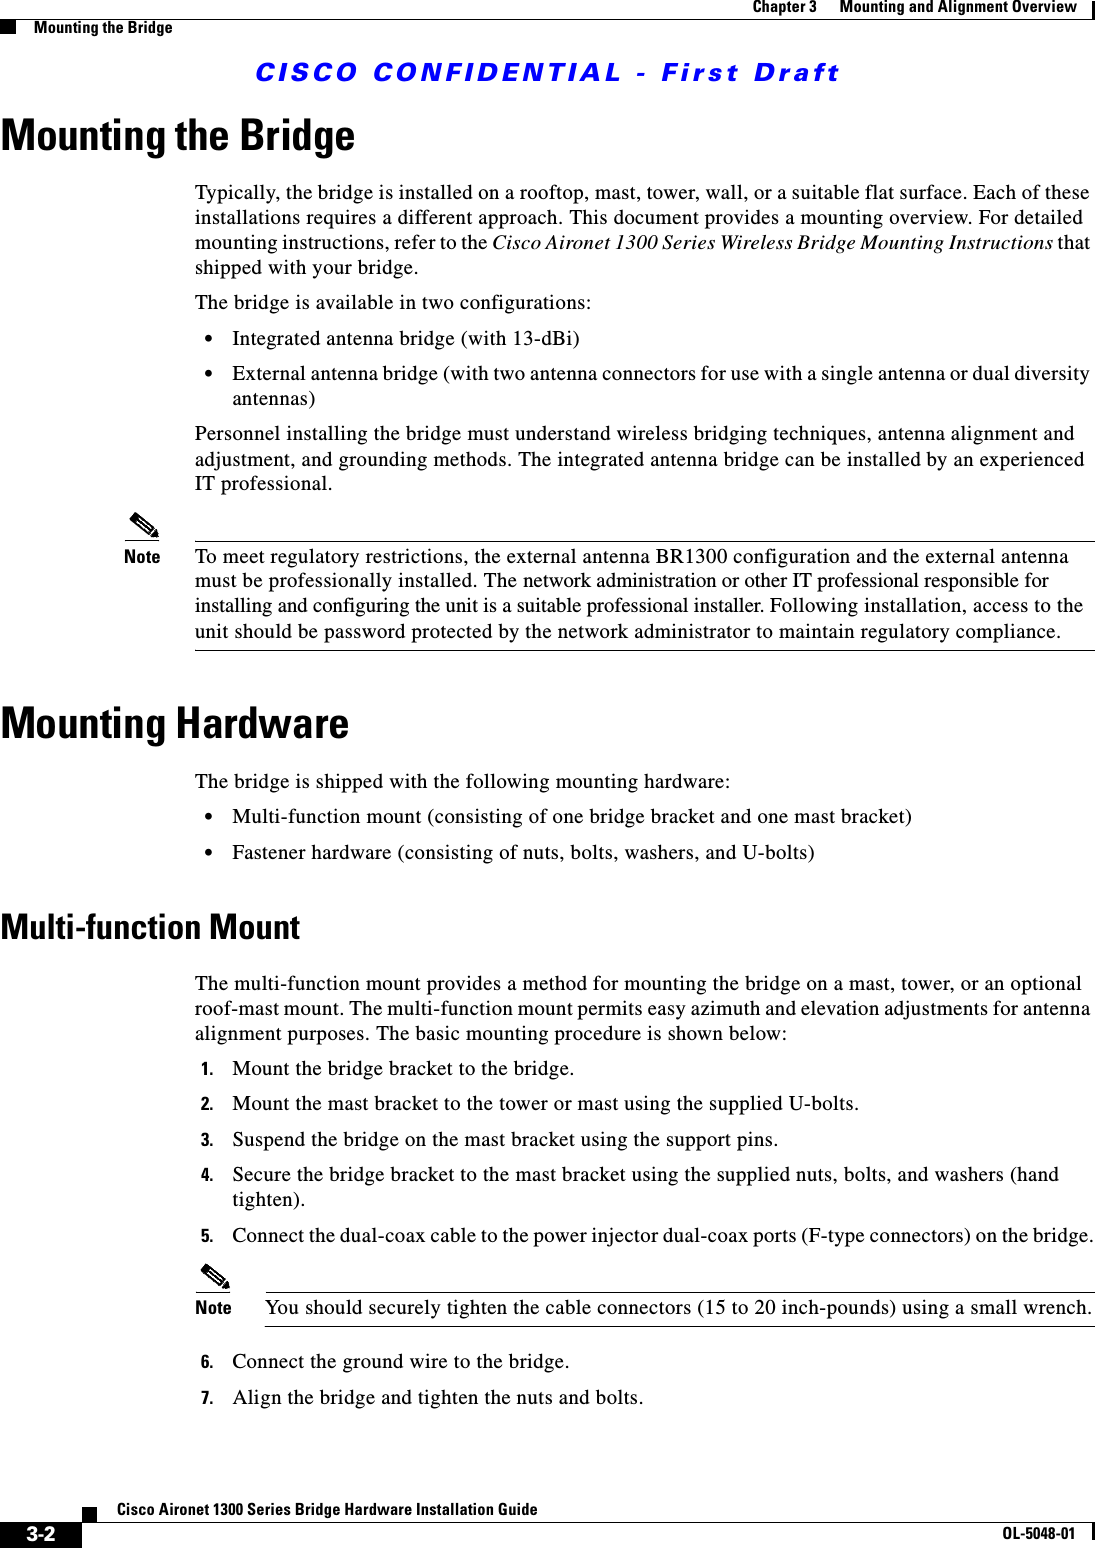 CISCO CONFIDENTIAL - First Draft3-2Cisco Aironet 1300 Series Bridge Hardware Installation GuideOL-5048-01Chapter 3      Mounting and Alignment OverviewMounting the BridgeMounting the BridgeTypically, the bridge is installed on a rooftop, mast, tower, wall, or a suitable flat surface. Each of these installations requires a different approach. This document provides a mounting overview. For detailed mounting instructions, refer to the Cisco Aironet 1300 Series Wireless Bridge Mounting Instructions that shipped with your bridge.The bridge is available in two configurations:•Integrated antenna bridge (with 13-dBi)•External antenna bridge (with two antenna connectors for use with a single antenna or dual diversity antennas)Personnel installing the bridge must understand wireless bridging techniques, antenna alignment and adjustment, and grounding methods. The integrated antenna bridge can be installed by an experienced IT professional. Note To meet regulatory restrictions, the external antenna BR1300 configuration and the external antenna must be professionally installed. The network administration or other IT professional responsible for installing and configuring the unit is a suitable professional installer. Following installation, access to the unit should be password protected by the network administrator to maintain regulatory compliance.Mounting HardwareThe bridge is shipped with the following mounting hardware:•Multi-function mount (consisting of one bridge bracket and one mast bracket)•Fastener hardware (consisting of nuts, bolts, washers, and U-bolts)Multi-function MountThe multi-function mount provides a method for mounting the bridge on a mast, tower, or an optional roof-mast mount. The multi-function mount permits easy azimuth and elevation adjustments for antenna alignment purposes. The basic mounting procedure is shown below:1. Mount the bridge bracket to the bridge. 2. Mount the mast bracket to the tower or mast using the supplied U-bolts.3. Suspend the bridge on the mast bracket using the support pins.4. Secure the bridge bracket to the mast bracket using the supplied nuts, bolts, and washers (hand tighten).5. Connect the dual-coax cable to the power injector dual-coax ports (F-type connectors) on the bridge.Note You should securely tighten the cable connectors (15 to 20 inch-pounds) using a small wrench.6. Connect the ground wire to the bridge.7. Align the bridge and tighten the nuts and bolts.